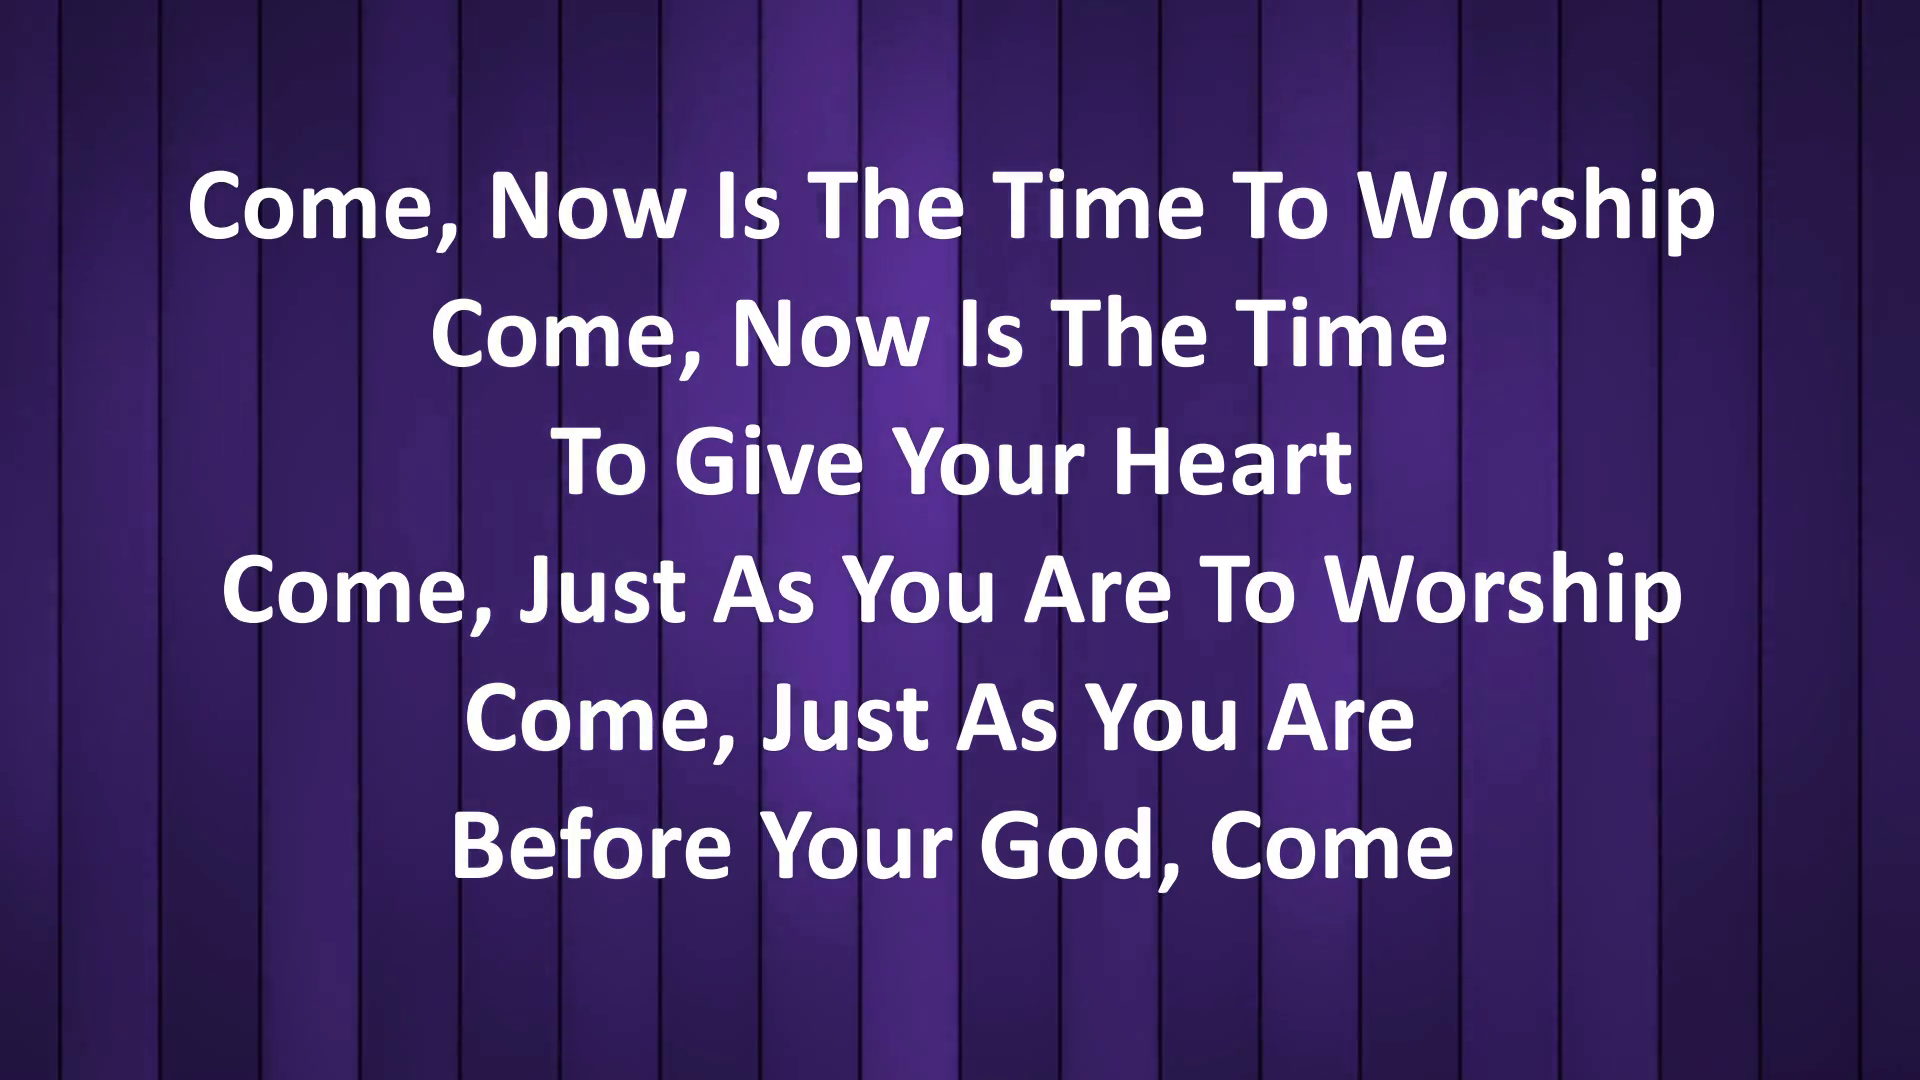 Come, Now Is The Time To Worship